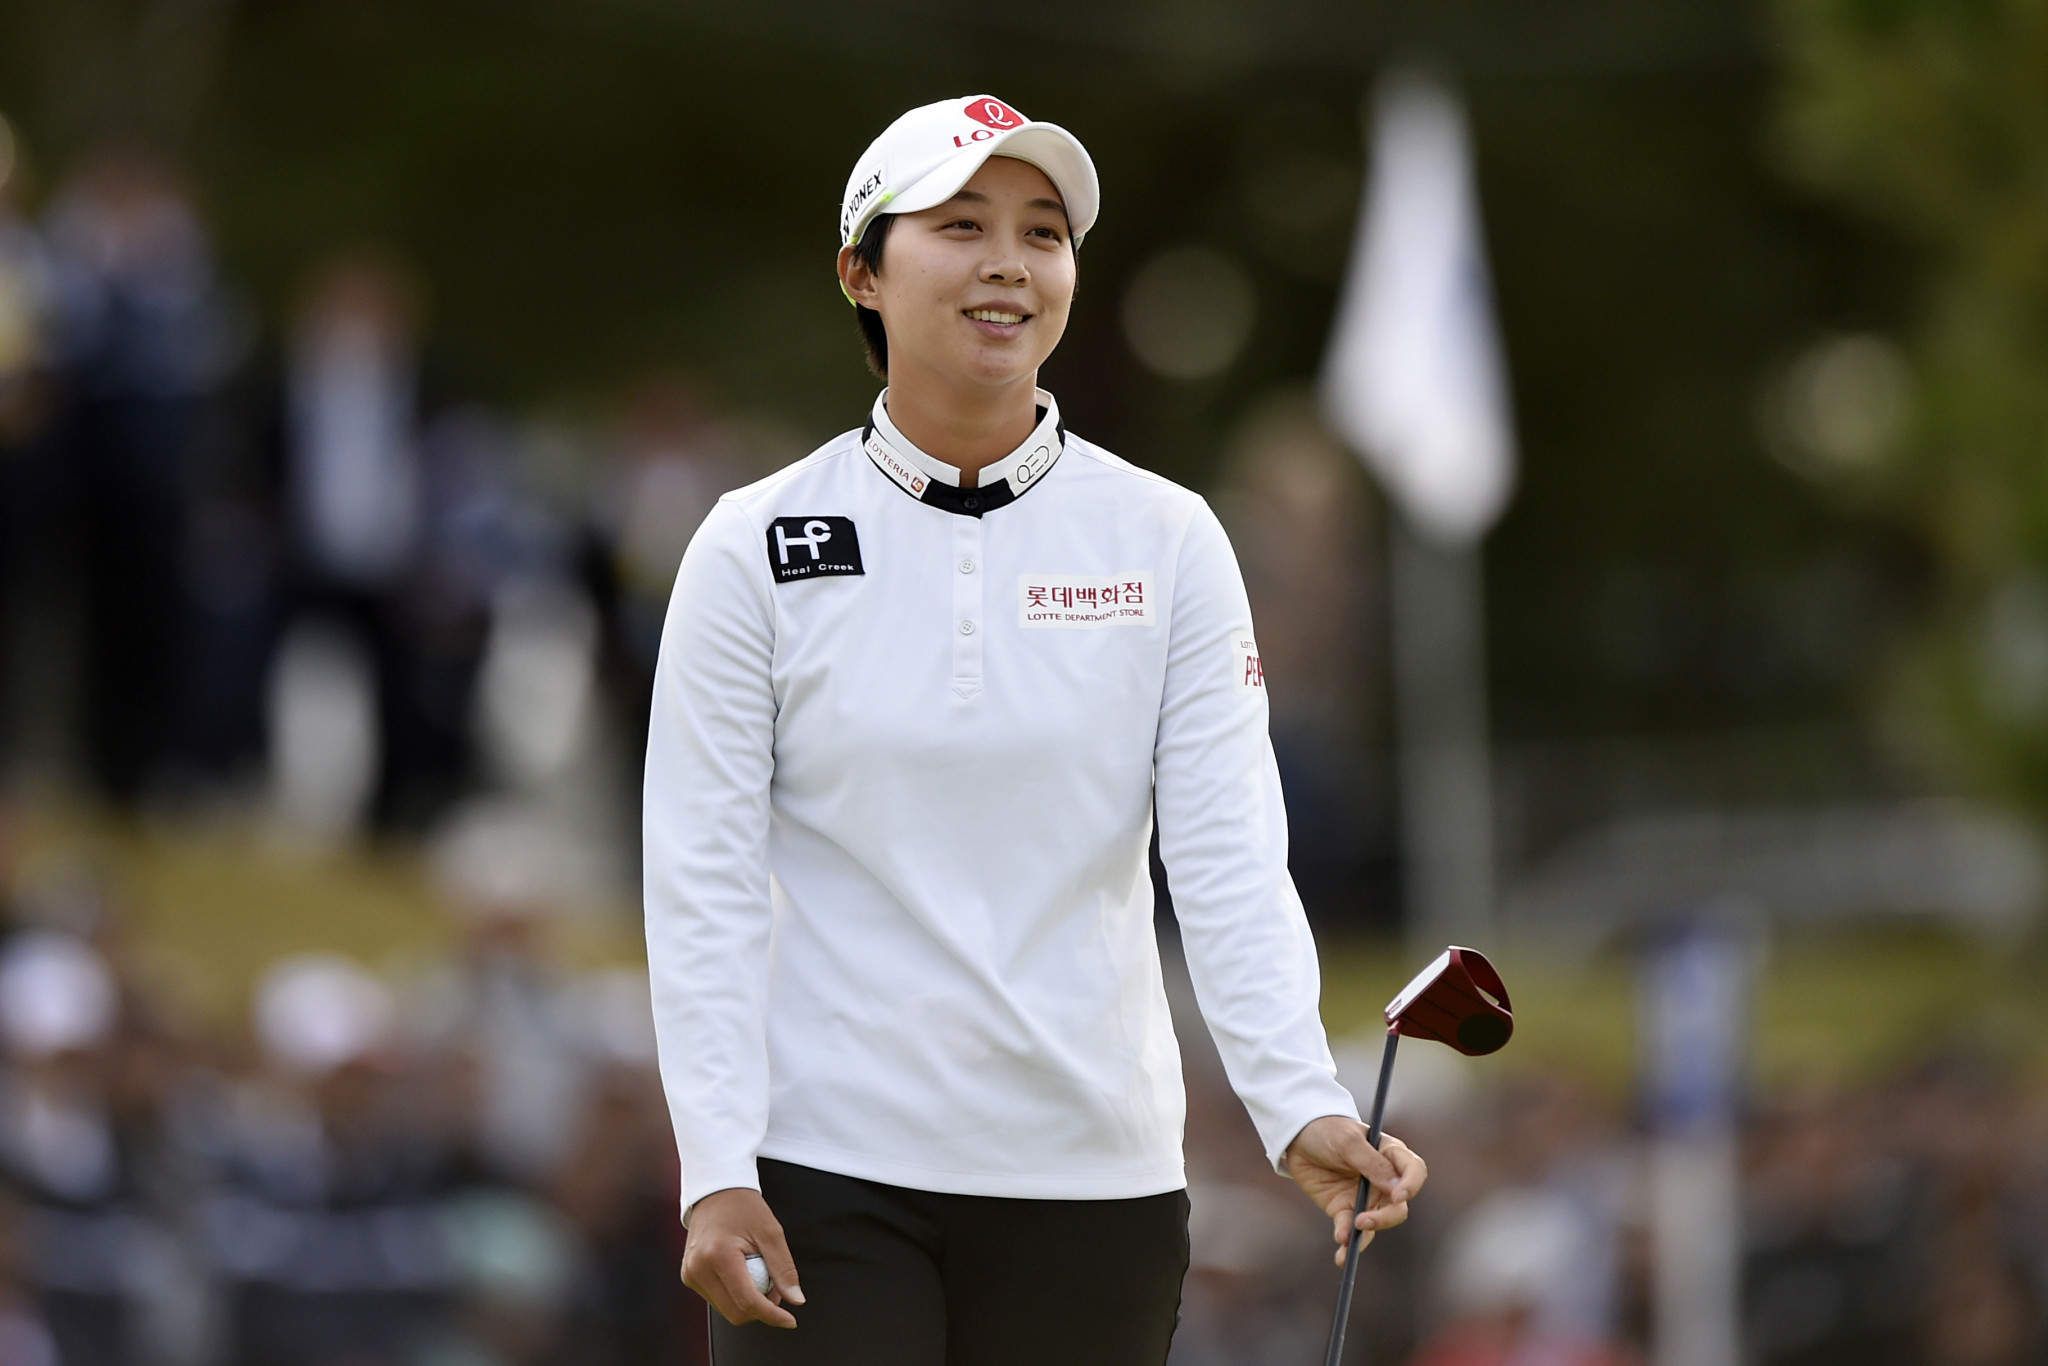 The agent of world number 10 Kim Hyo-joo revealed she was not travelling to the Women's British Open due to the coronavirus pandemic ©Getty Images